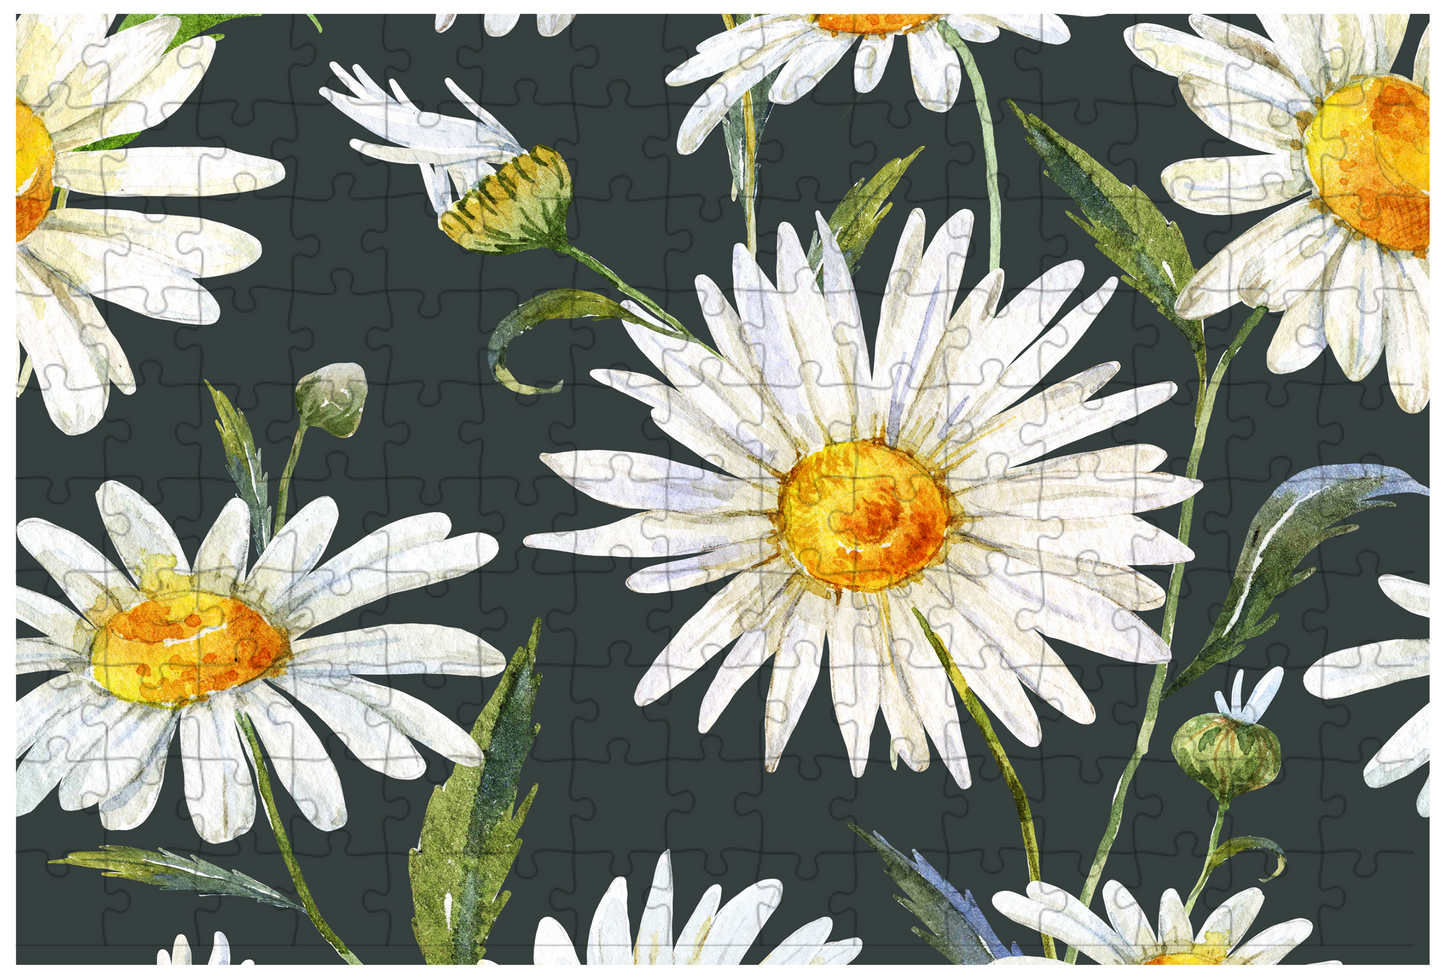 Daisy Dreams: 150-Piece Floral Puzzle - Relaxing, Challenging, and Beautiful - Perfect Gift - Handcrafted Art